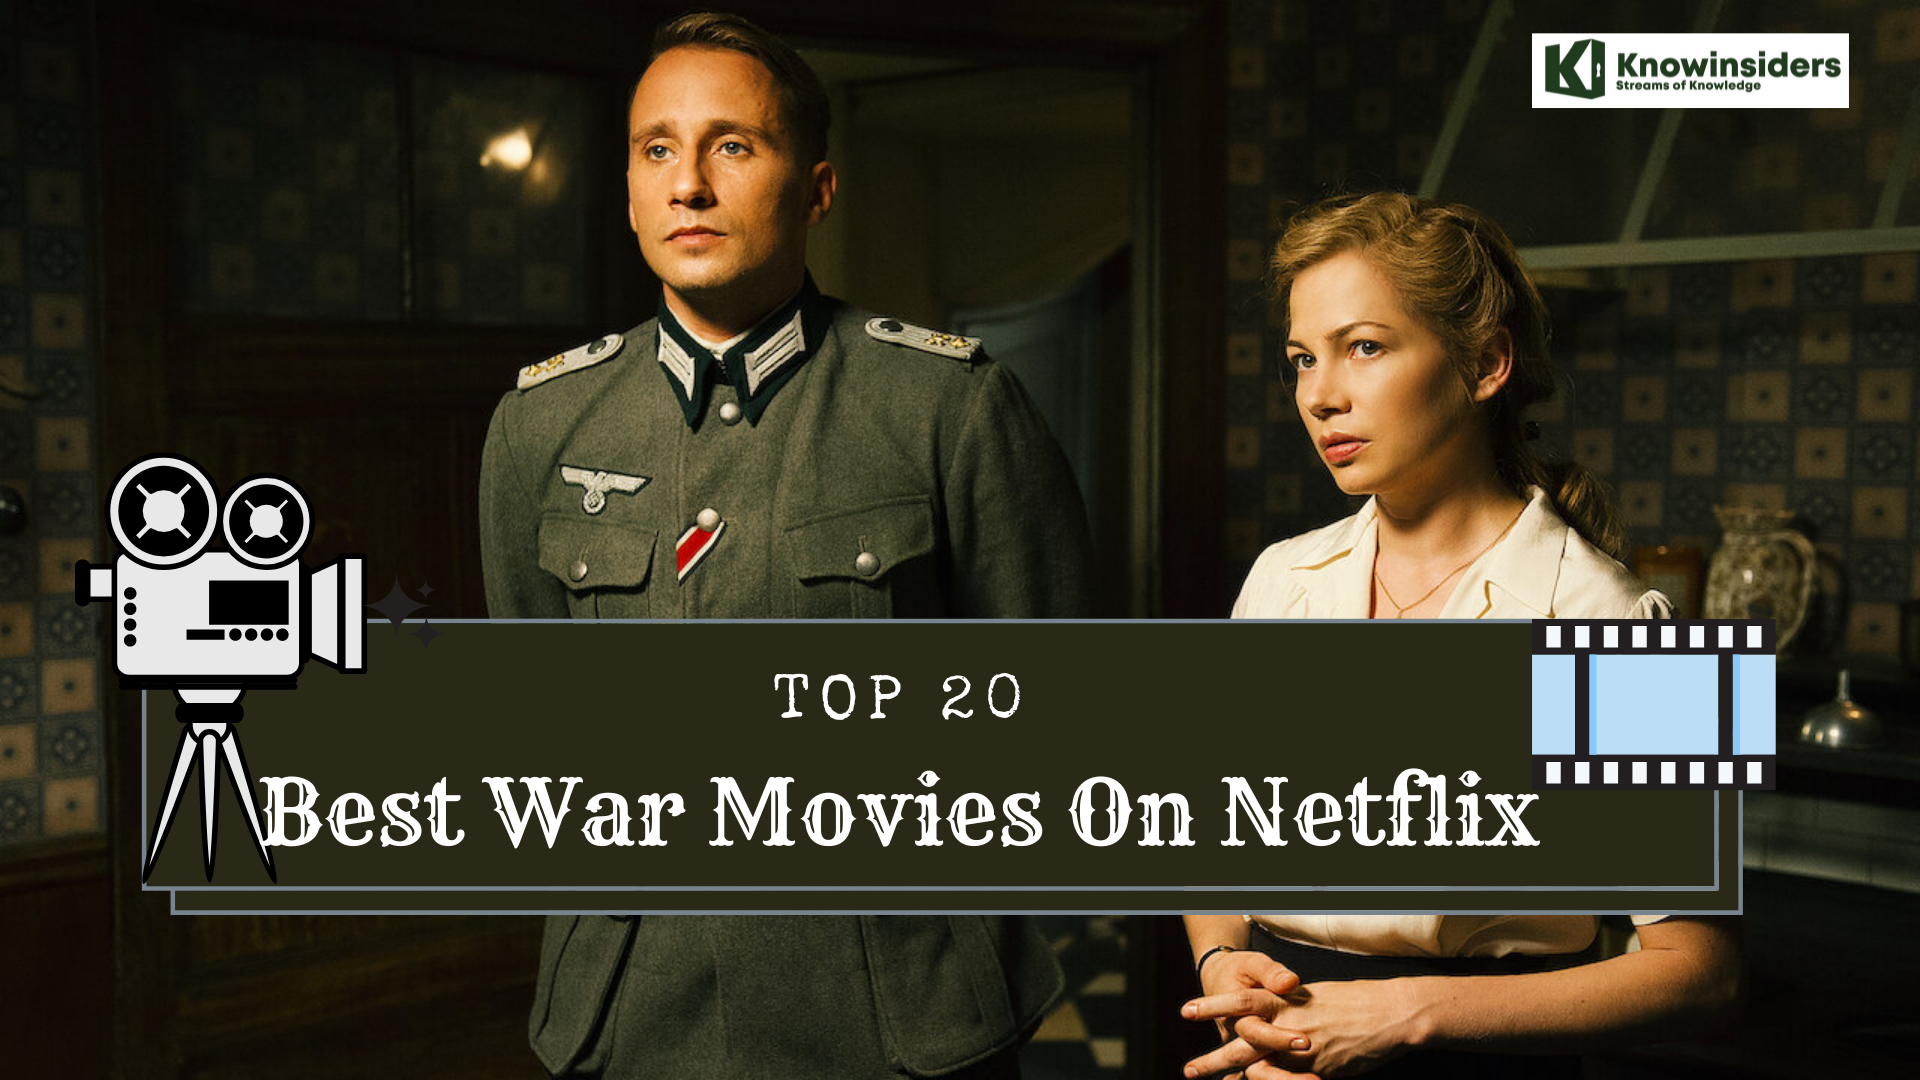 Top 20 Best War Movies on Netflix Of All Time